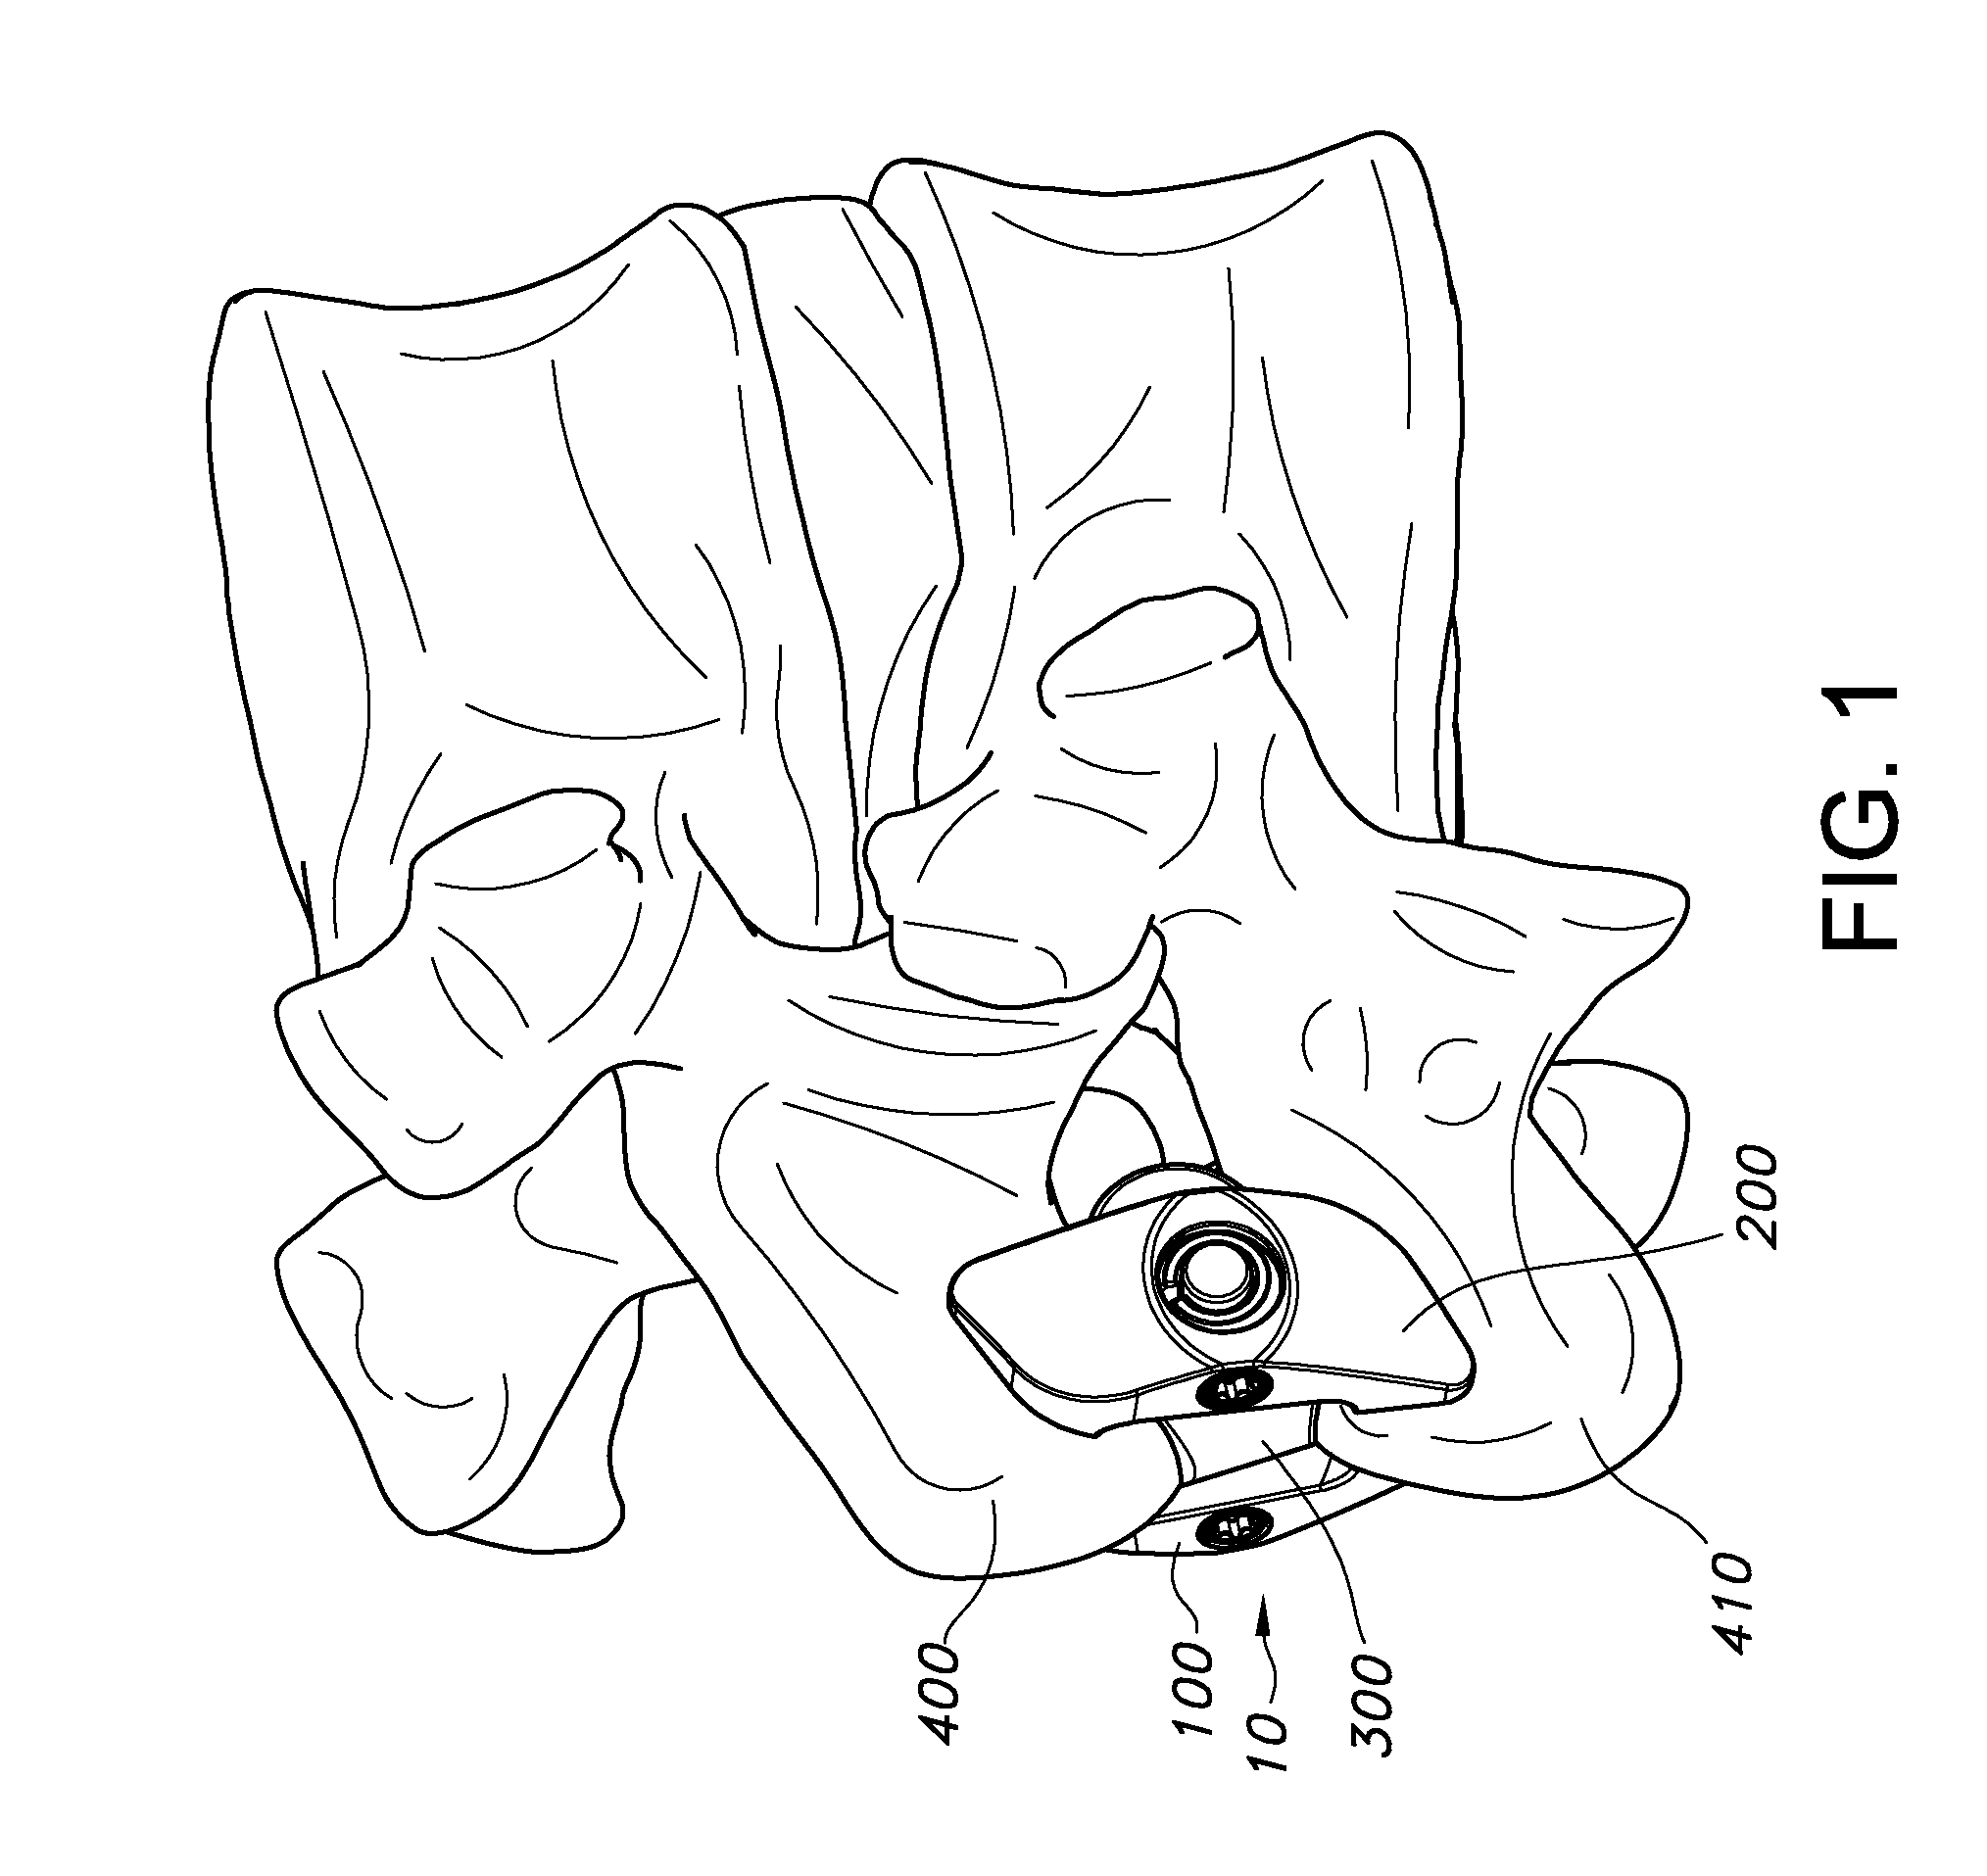 Spinous process fixation apparatus and method